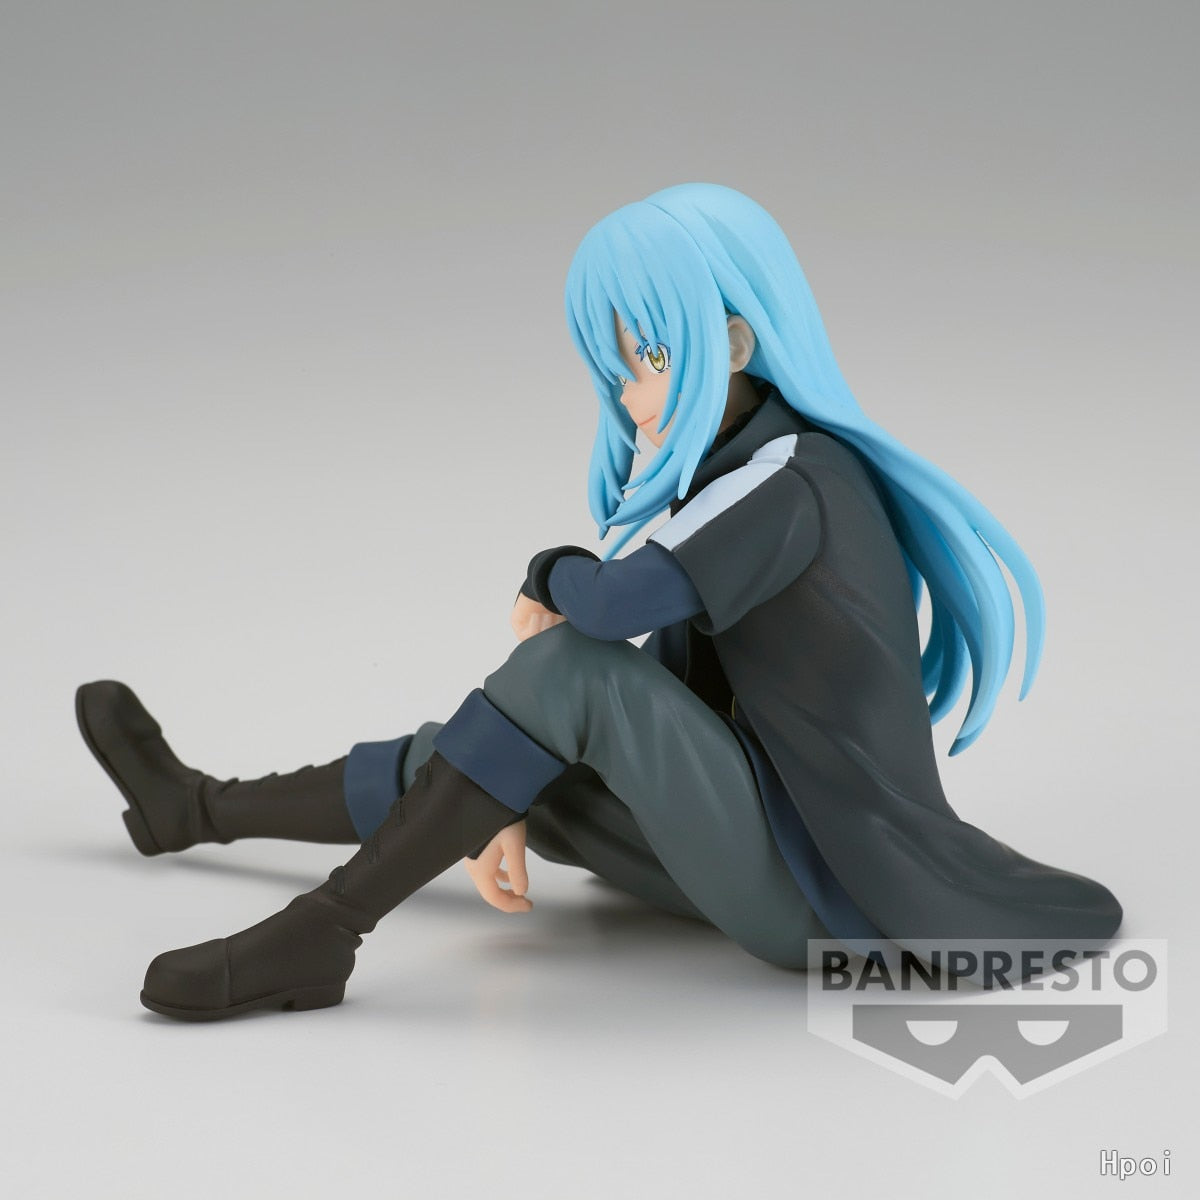 Tempest Duo: Handcrafted Rimuru & Veldora Figures from "That Time I Got Reincarnated As A Slime